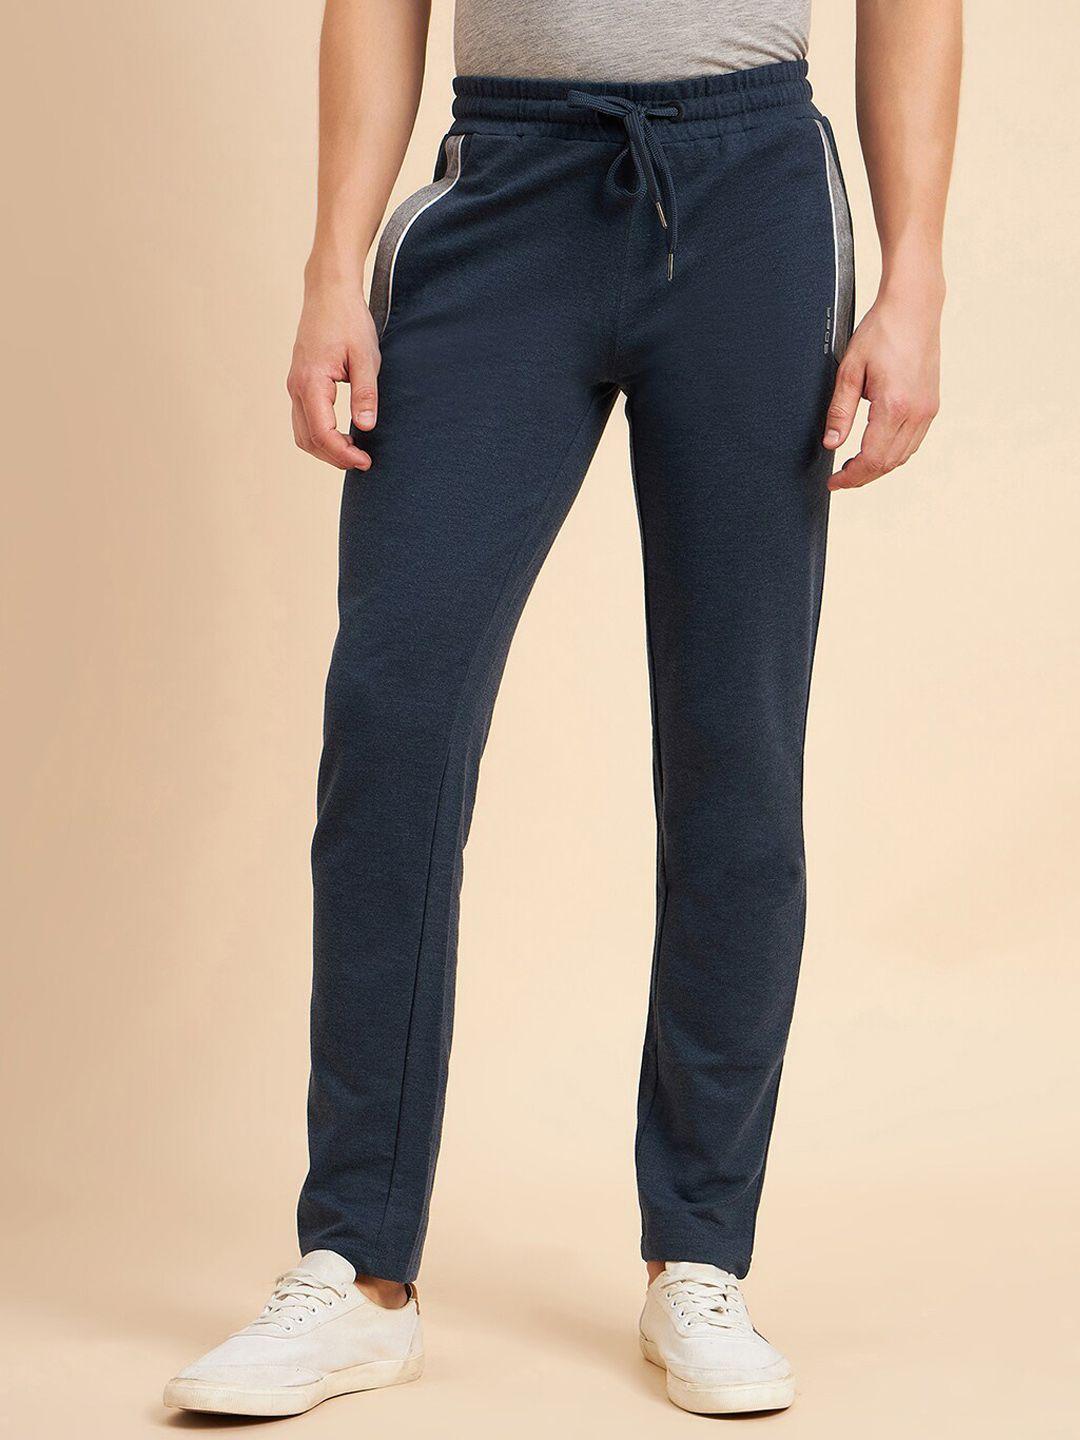 sweet-dreams-navy-blue-men-mid-rise-dry-fit-technology-track-pants